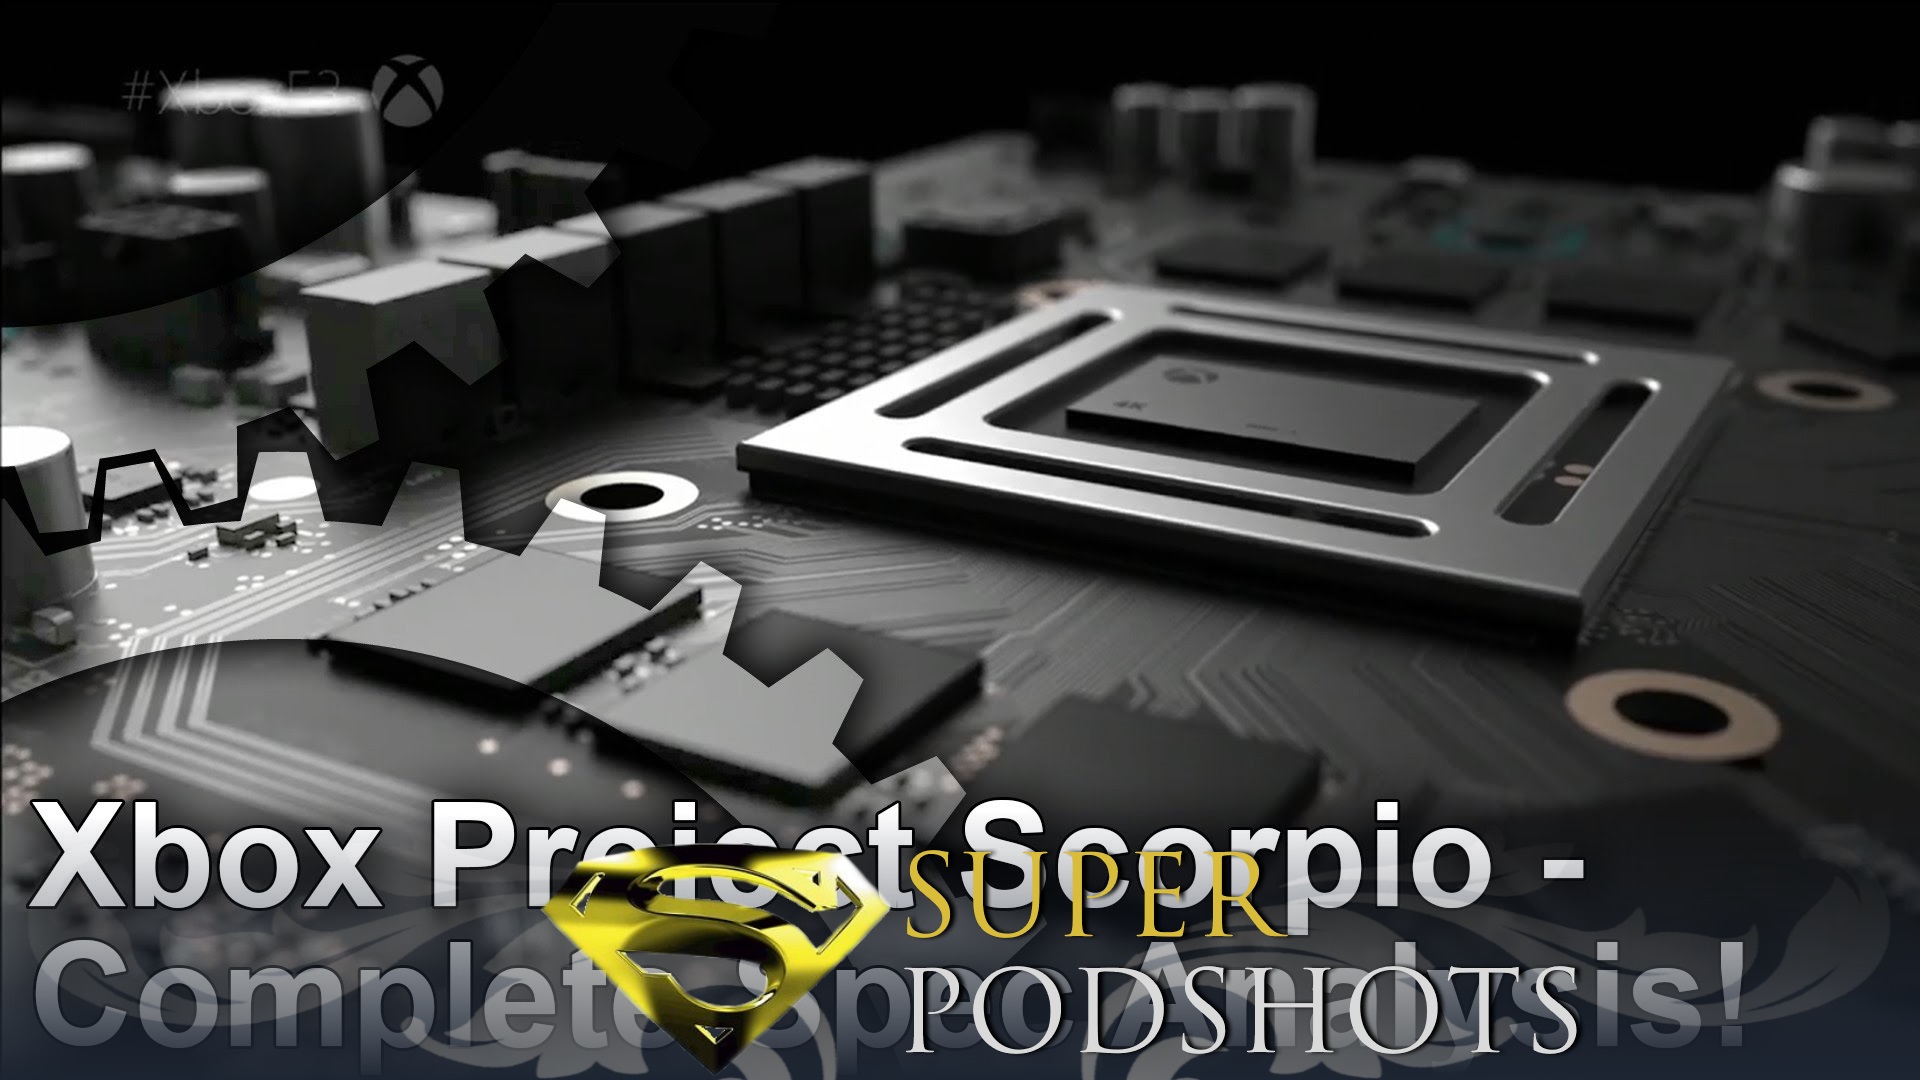 Super Podshots Ep. 68 - Scorpio Thoughts, Exclusives Returns & The fall & Rise of X1 